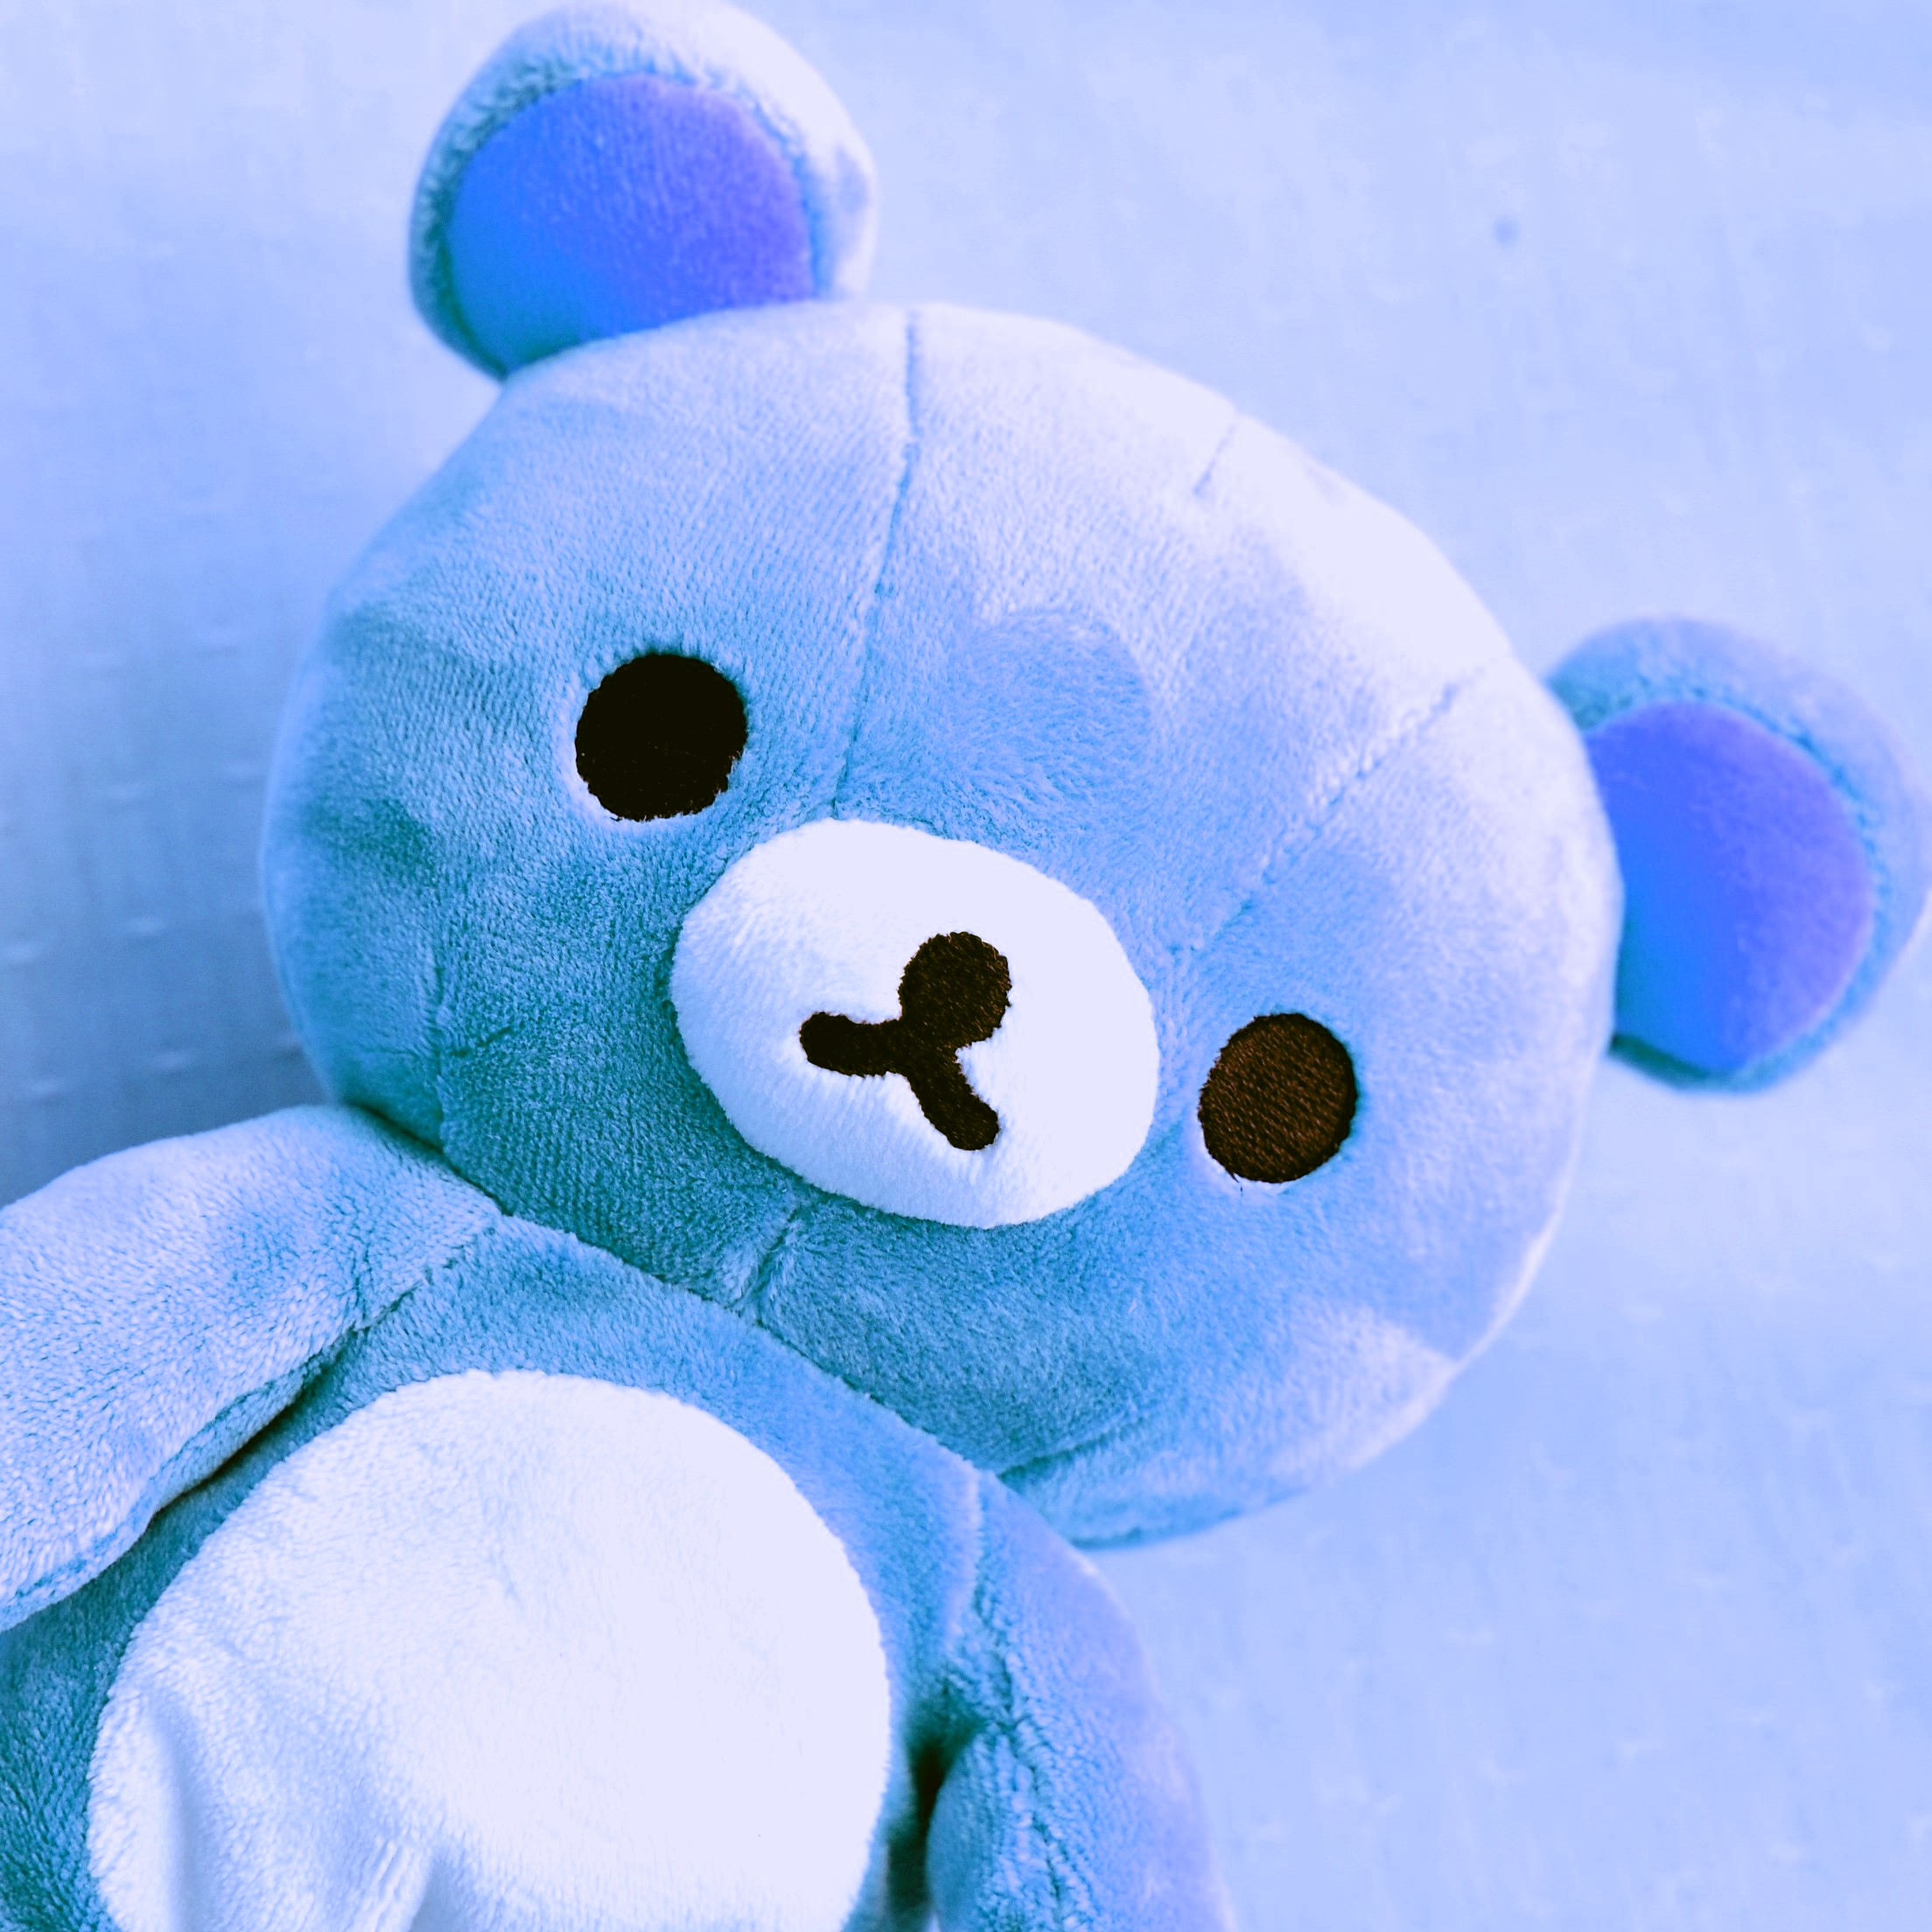 File:Bear with blue filter.jpg